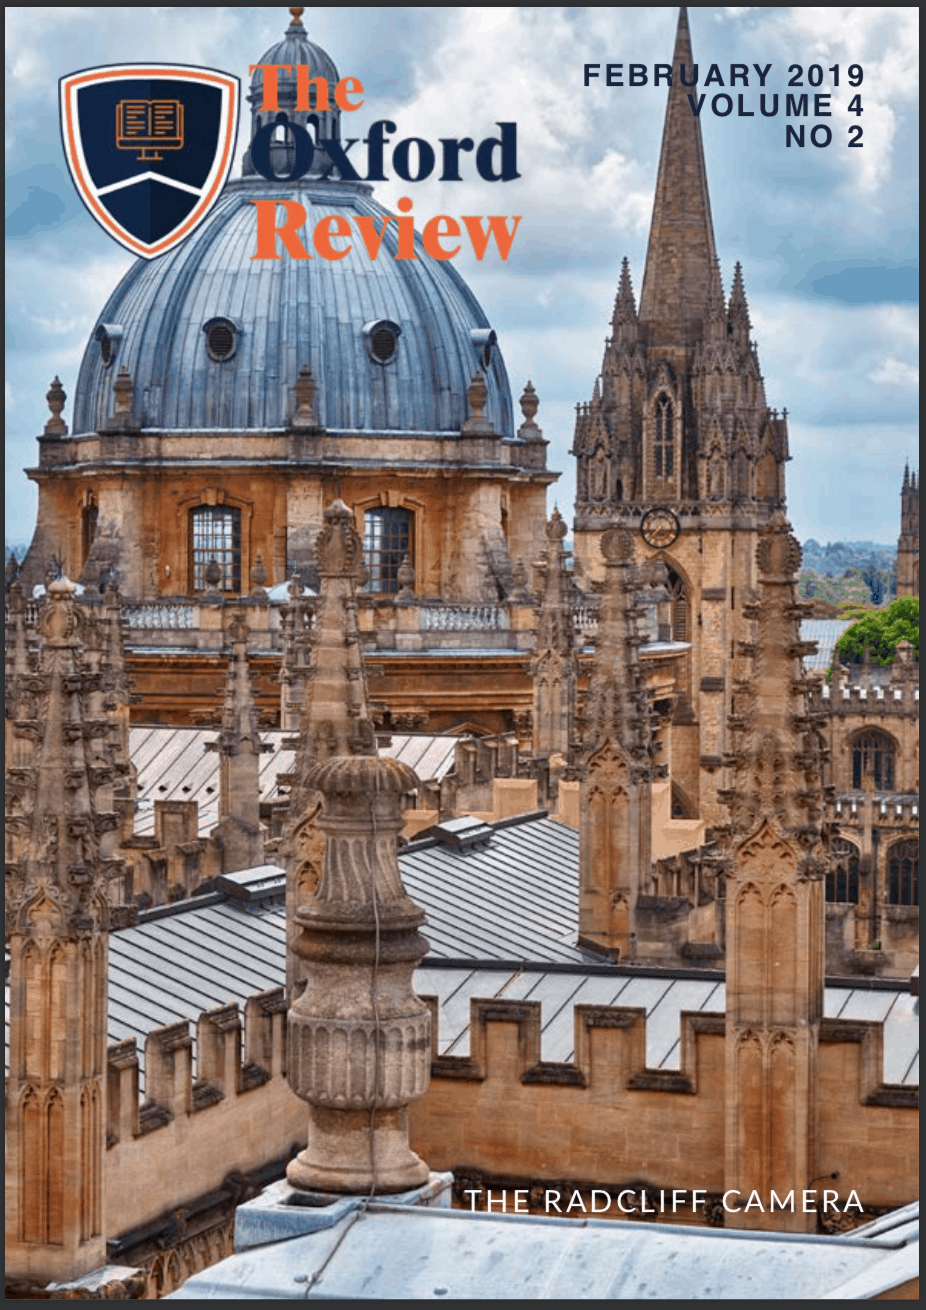 The Oxford Review Vol 4 No 2